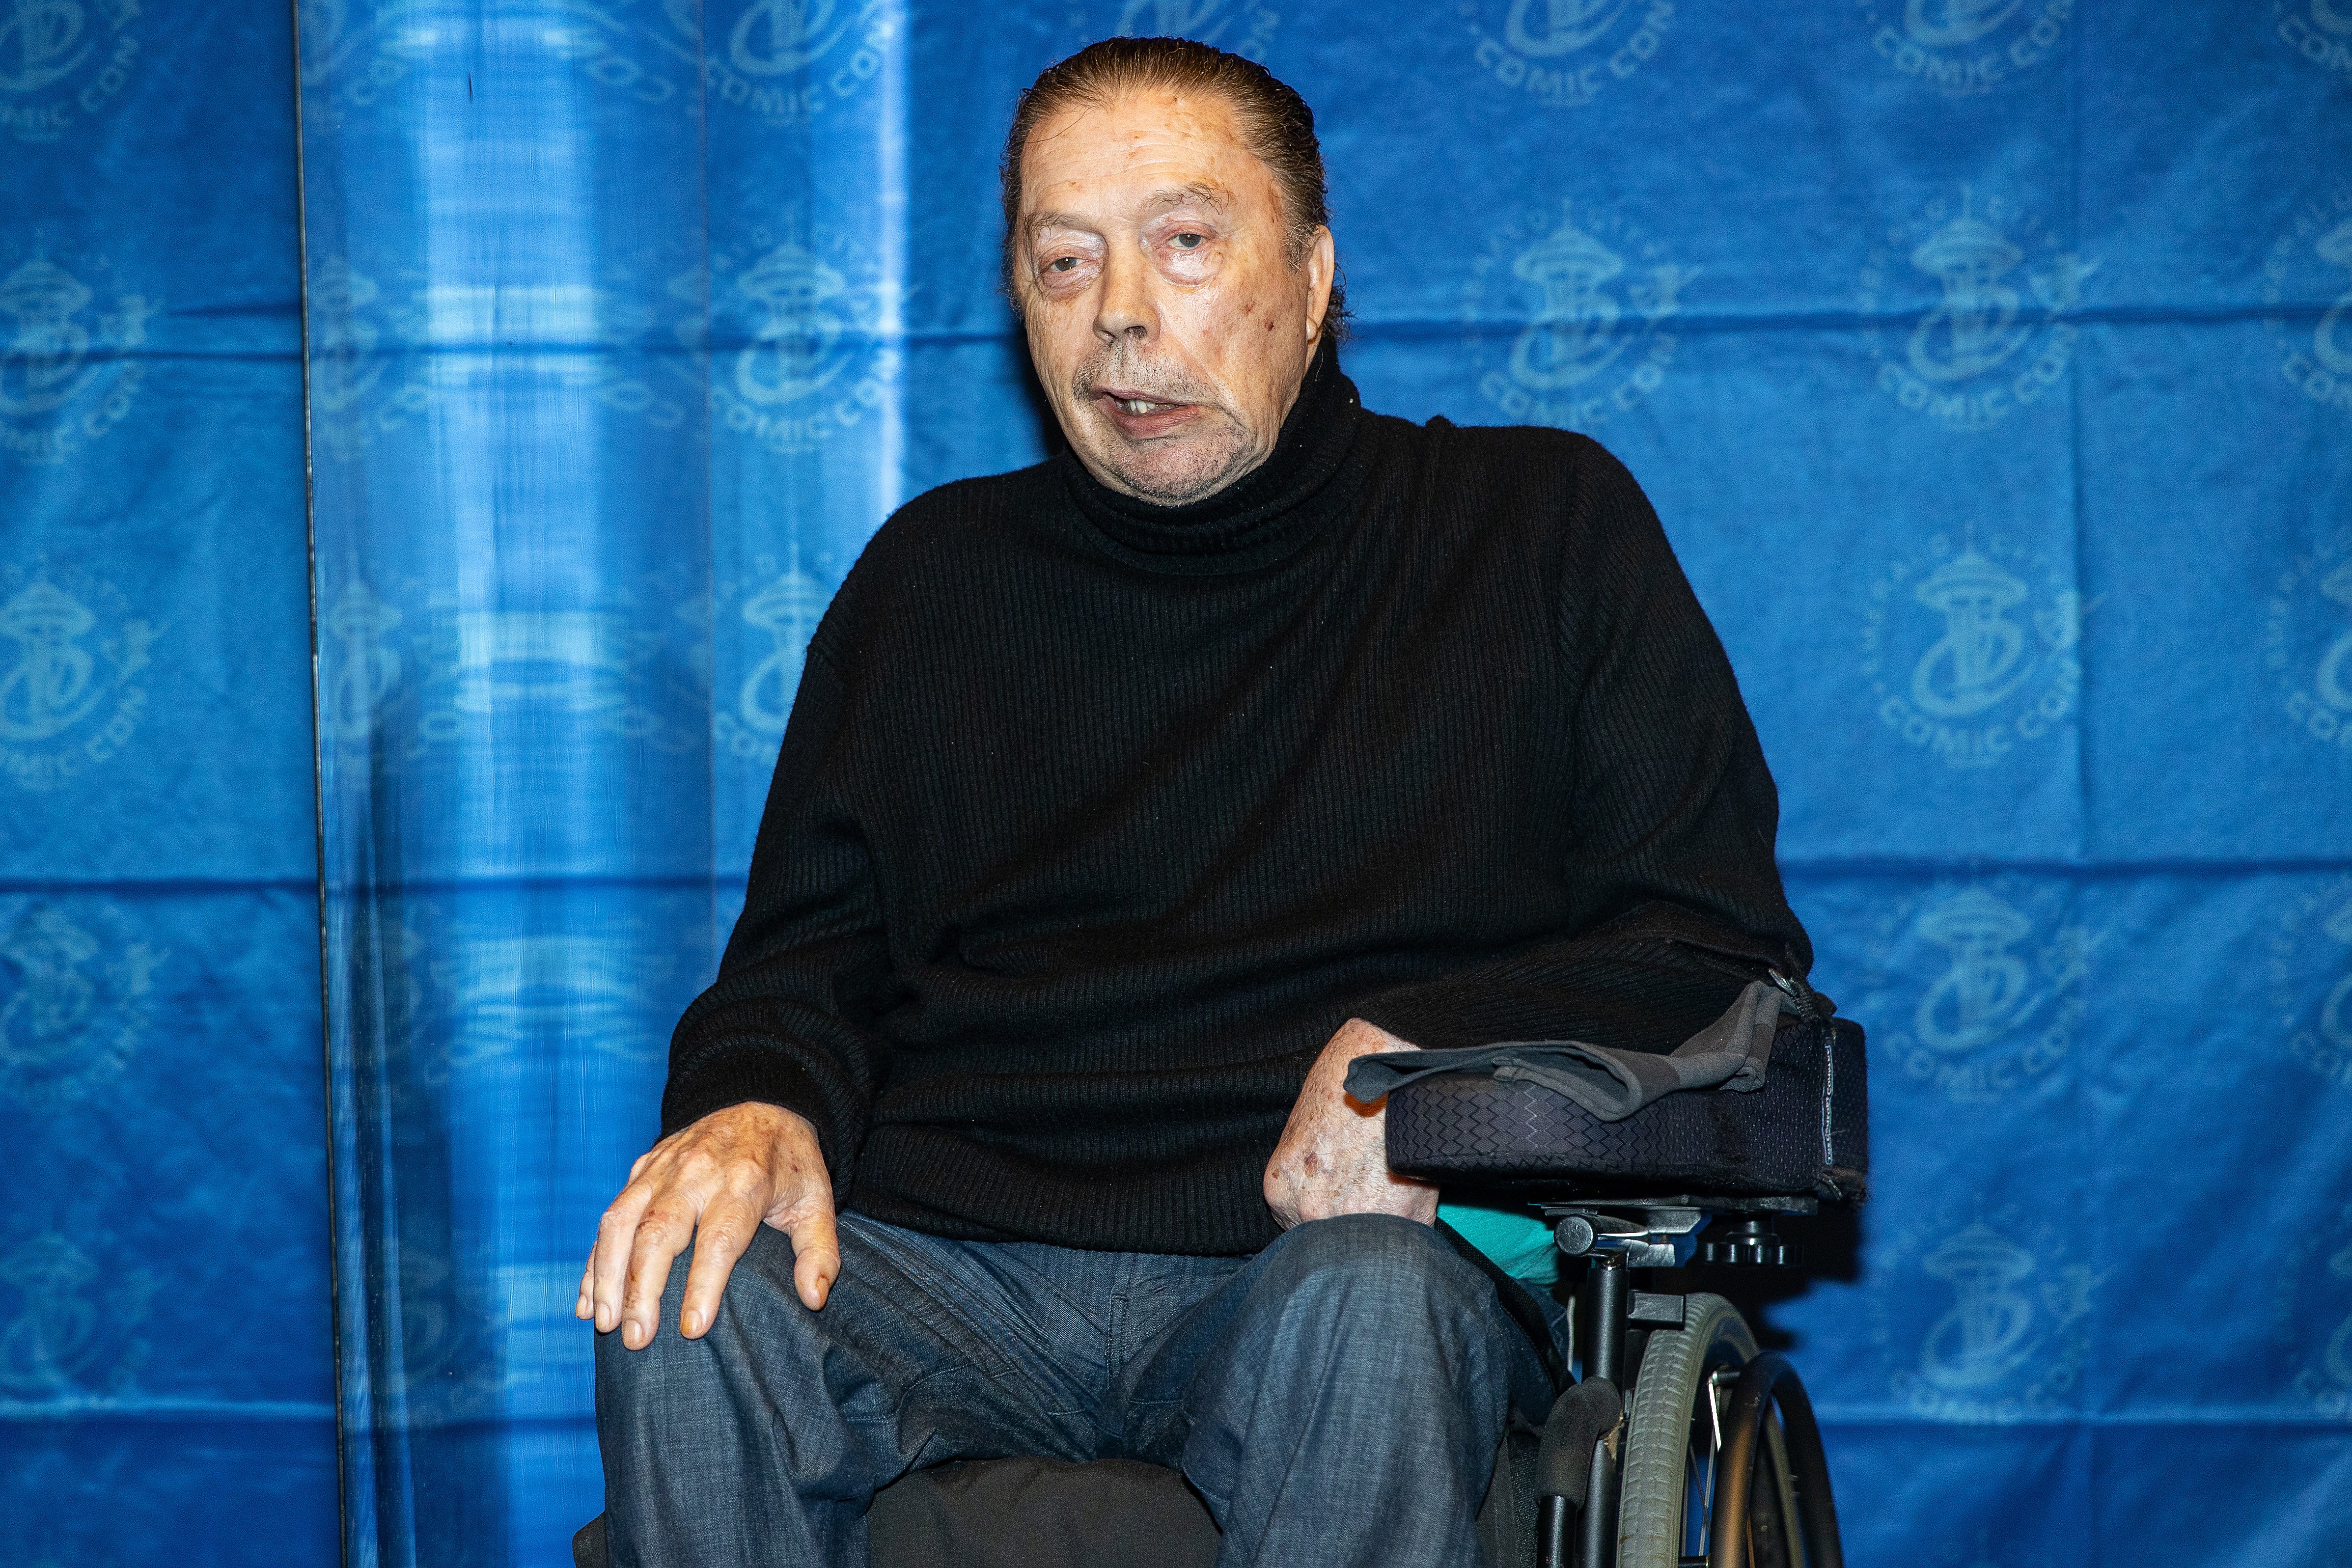 Tim Curry at Washington State Convention Center on December 04, 2021 in Seattle, Washington | Source: Getty Images